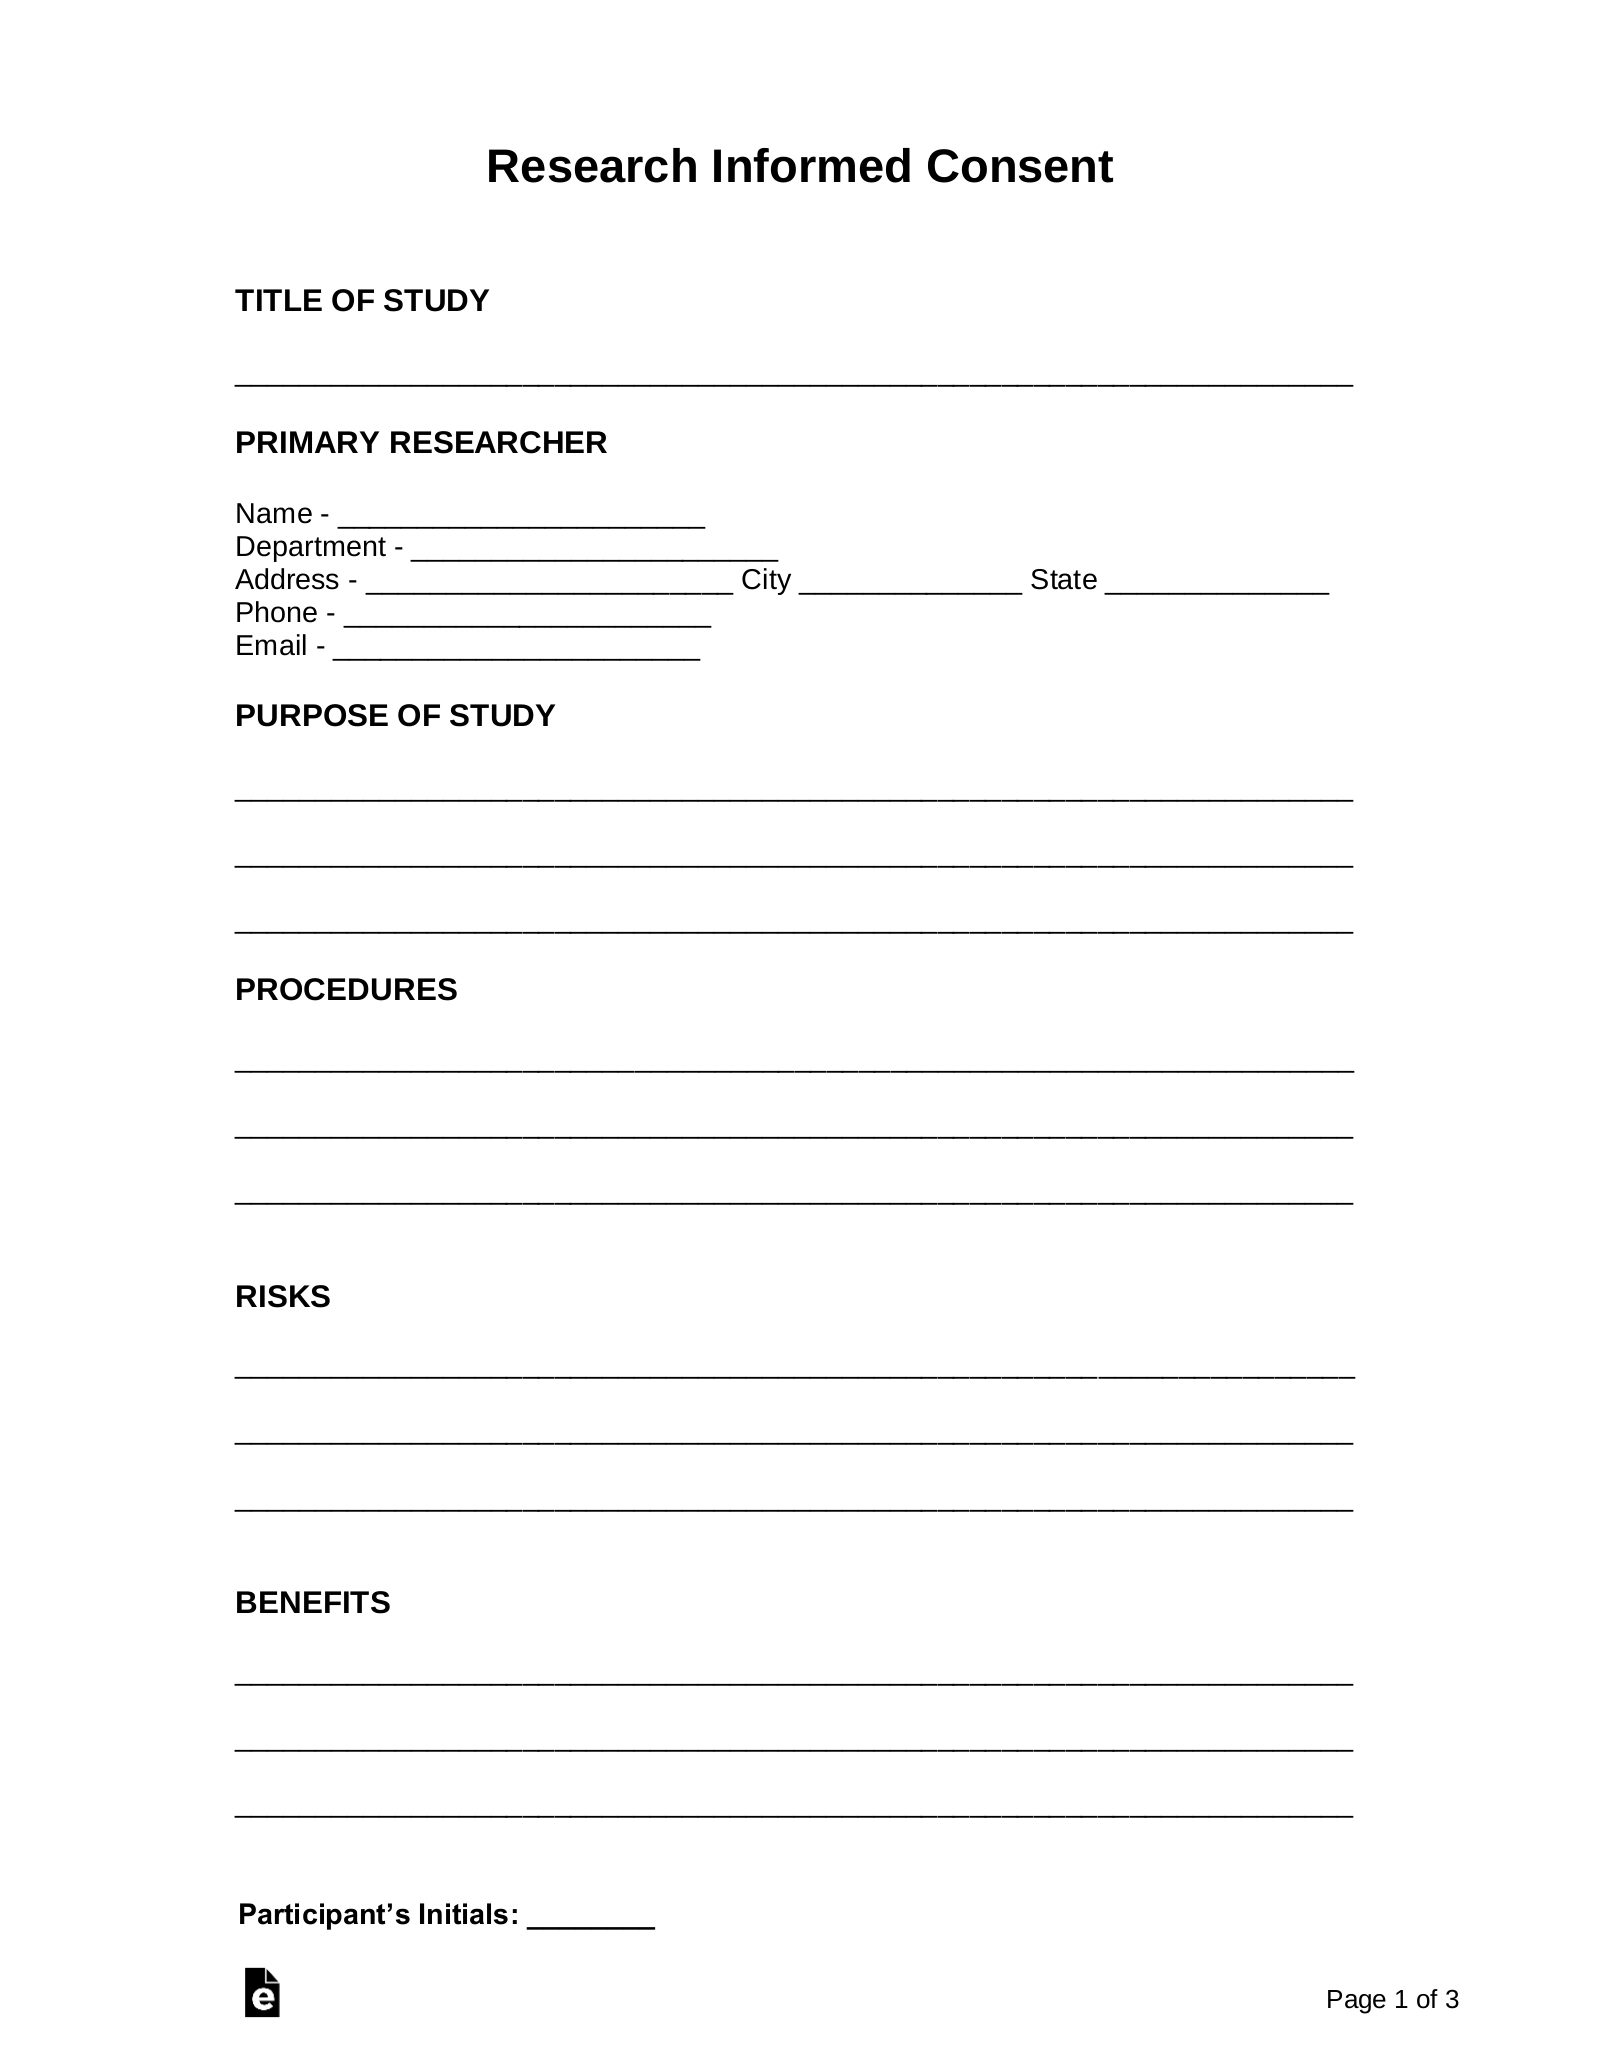 Free Research Informed Consent Form PDF Word EForms